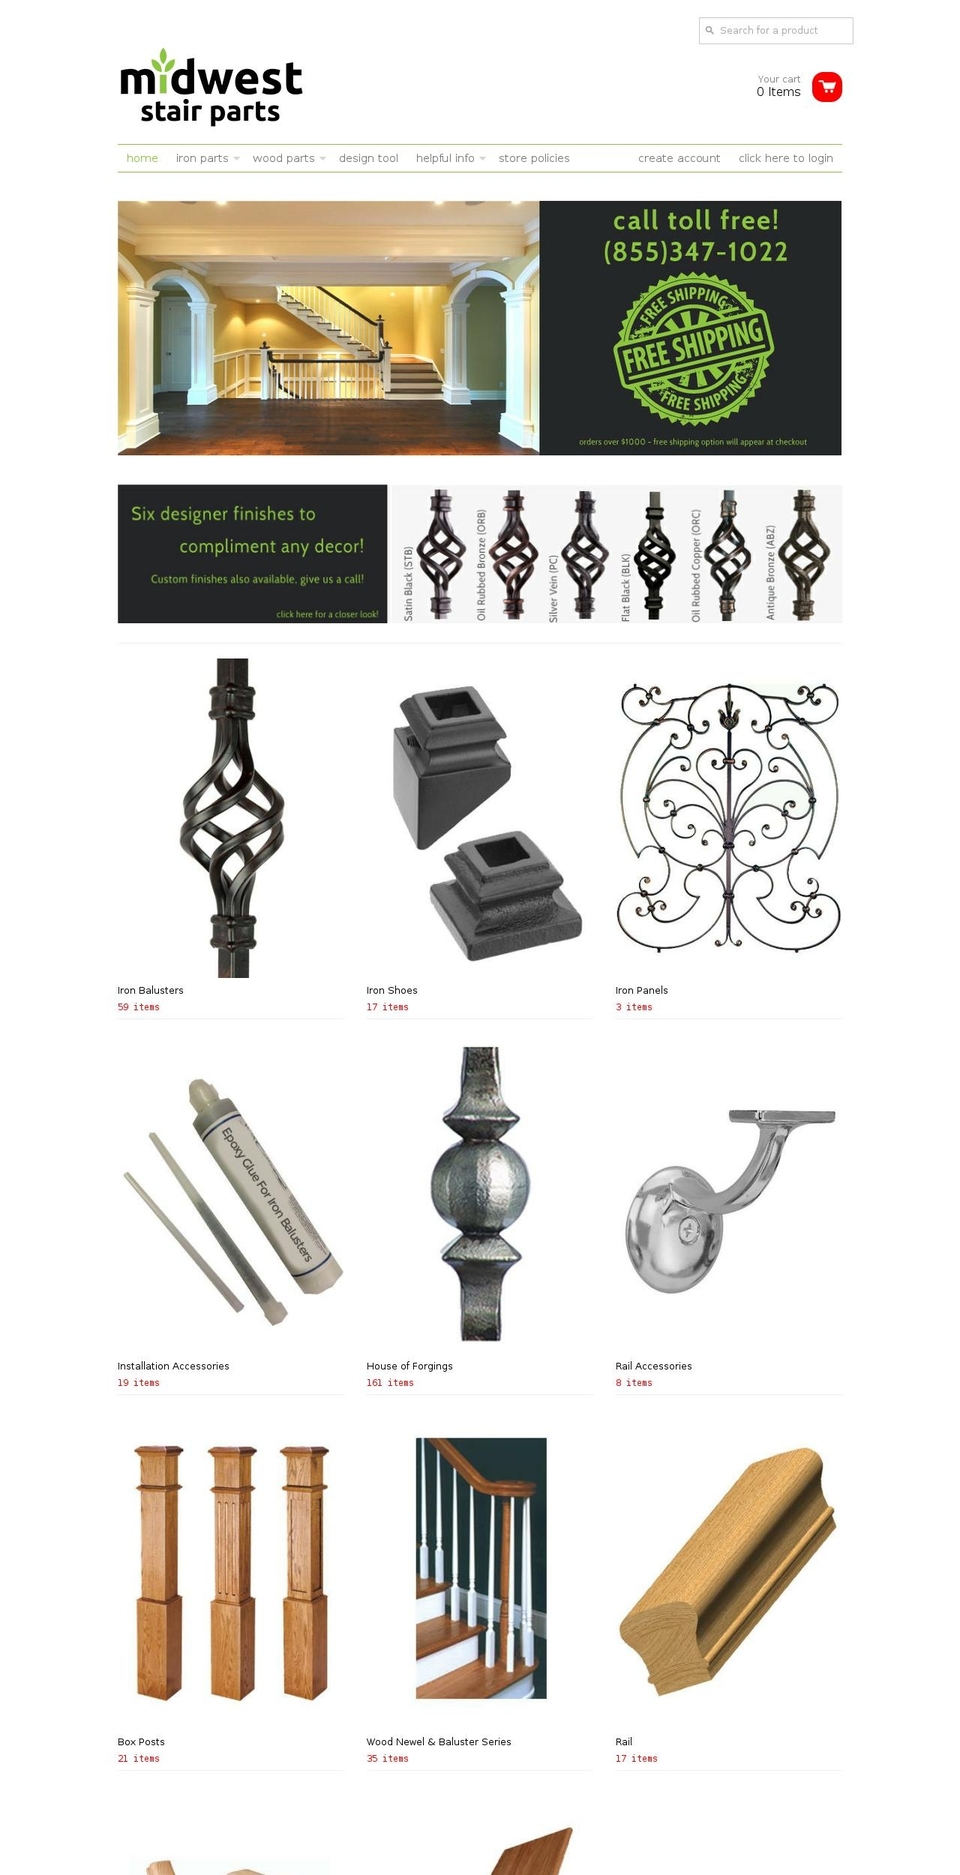 Wholesale Shopify theme site example midweststairparts.com